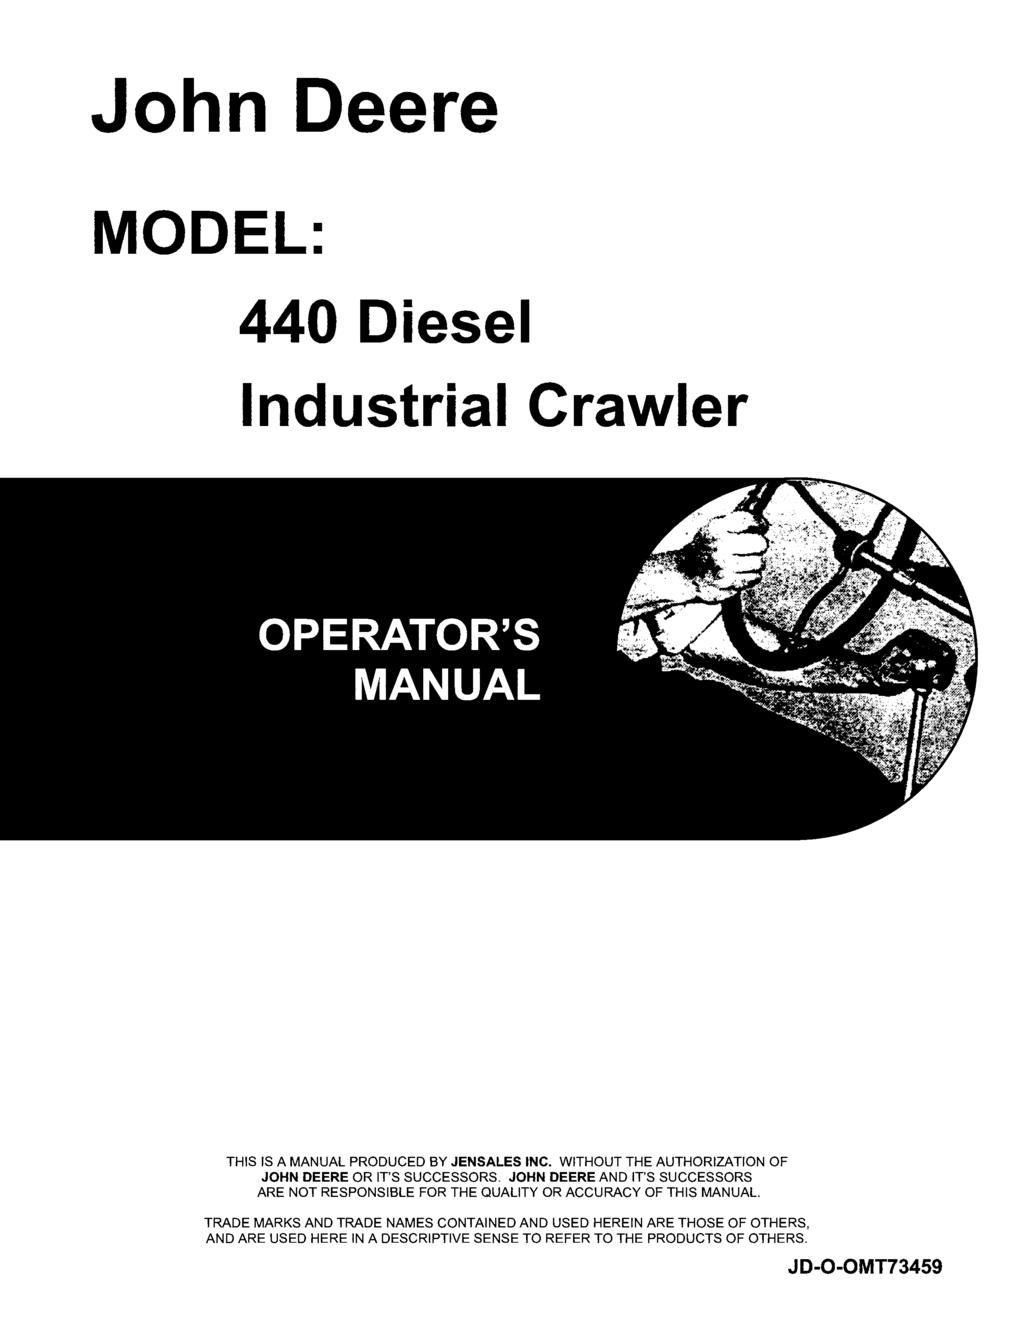 John Deere MODEL: 440 Diesel Industrial Crawler THIS IS A MANUAL PRODUCED BY JENSALES INC. WITHOUT THE AUTHORIZATION OF JOHN DEERE OR IT'S SUCCESSORS.